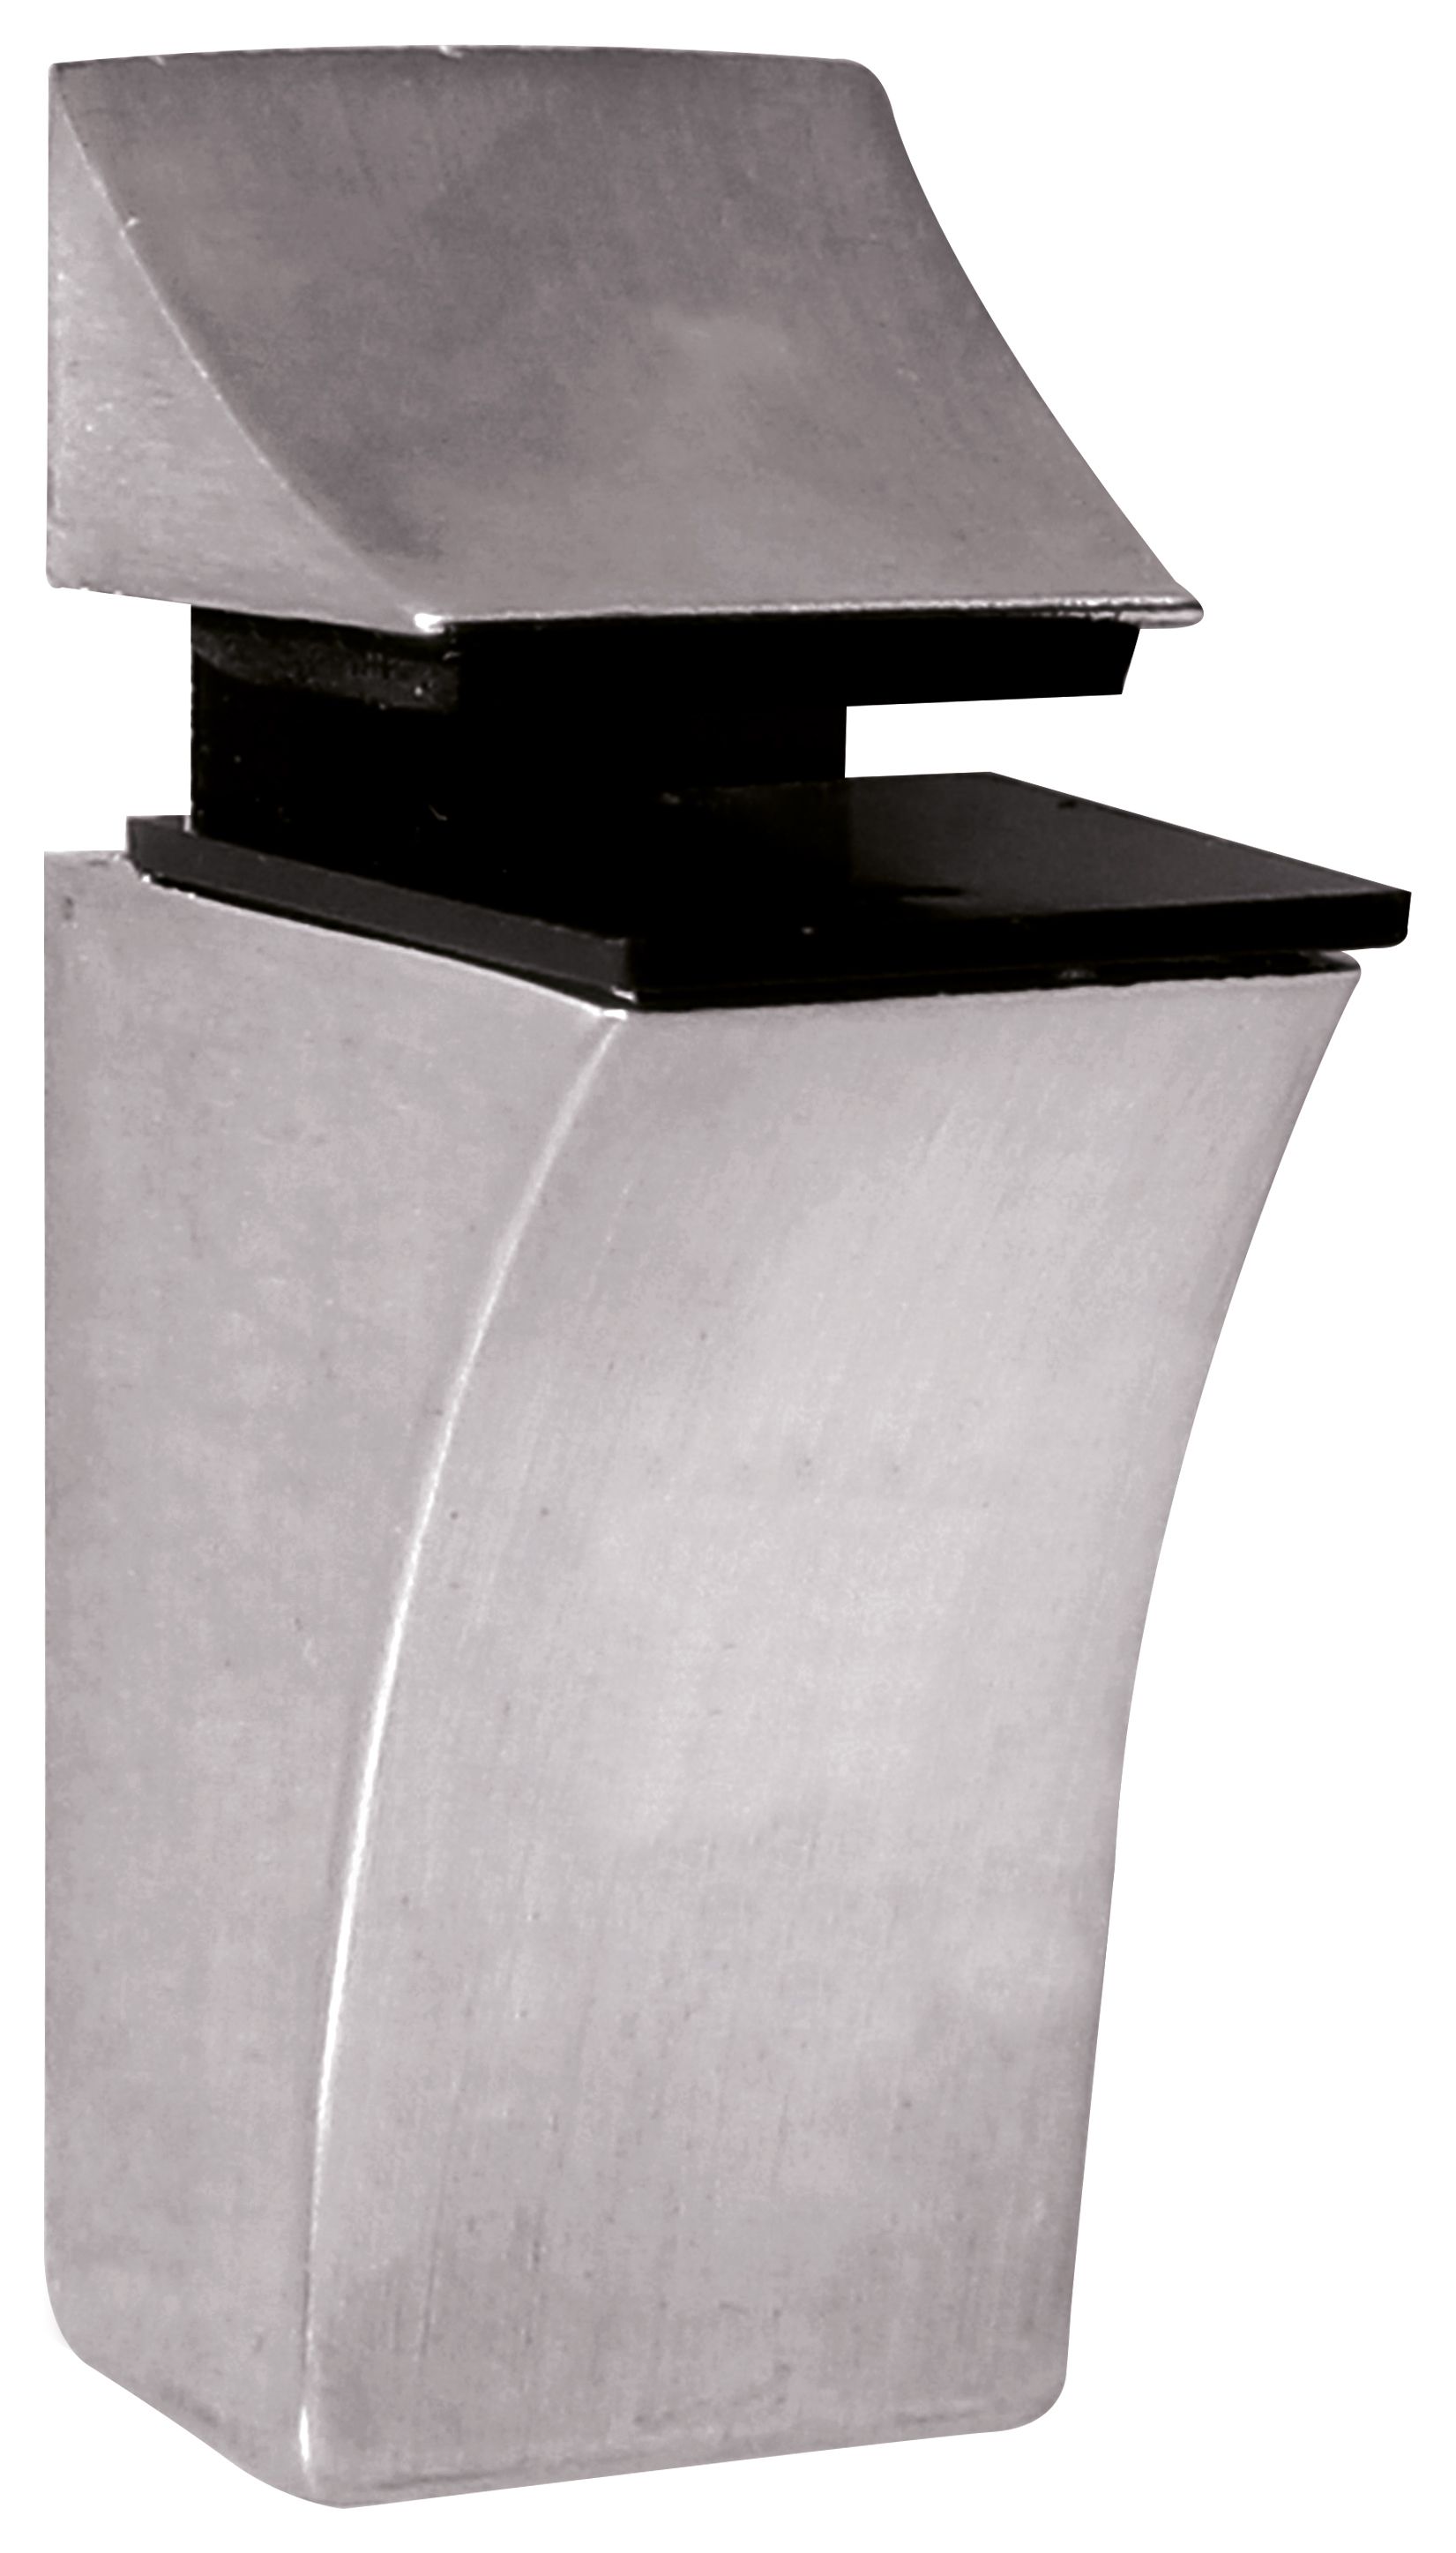 Image of Trend Eco Stainless Steel Shelf Brackets Pair